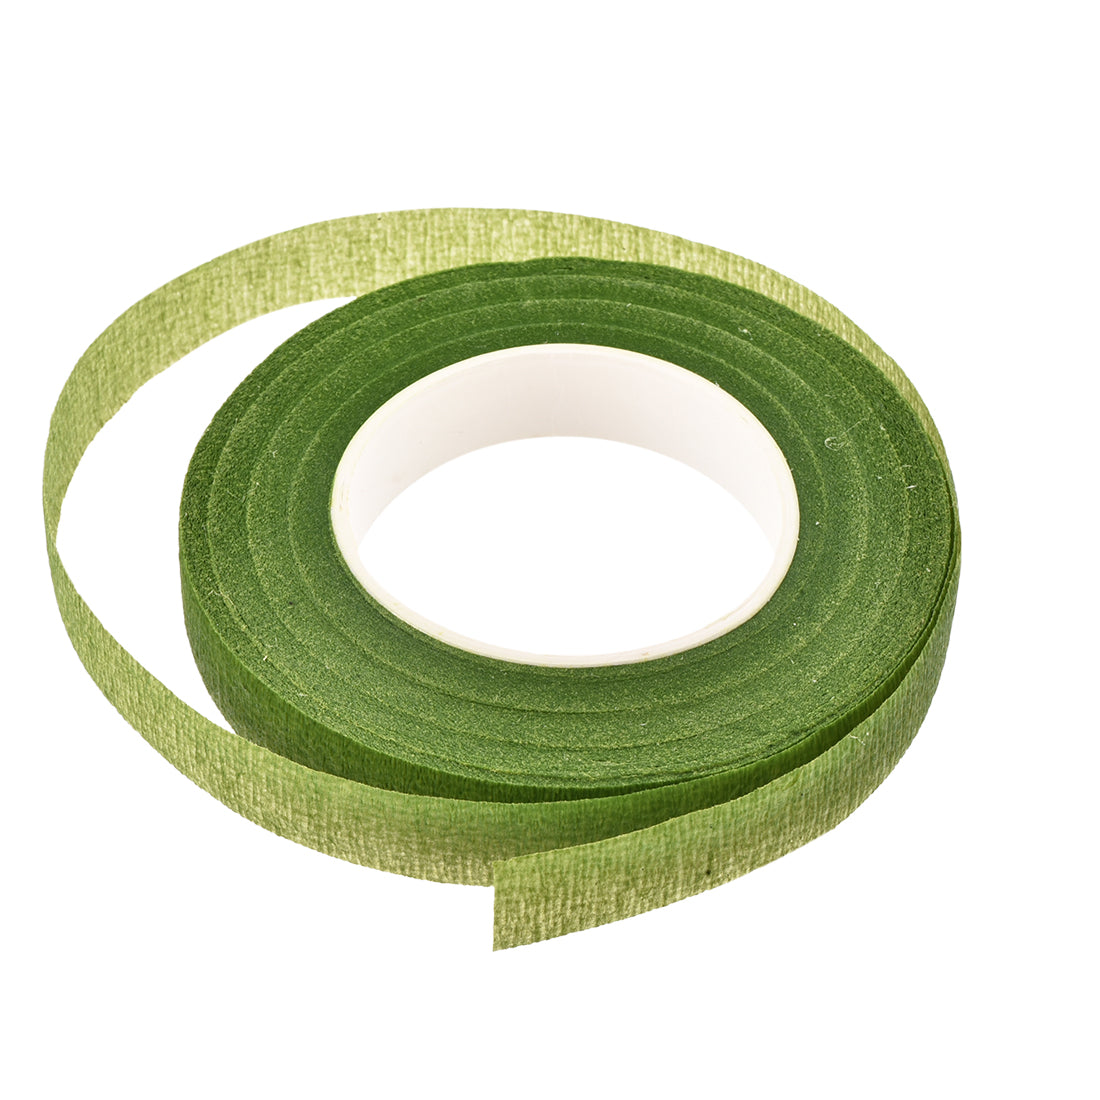 uxcell Uxcell 4Roll 1/2"x30Yard Light Green Floral Tape Flower Adhesives Floral Arrangement